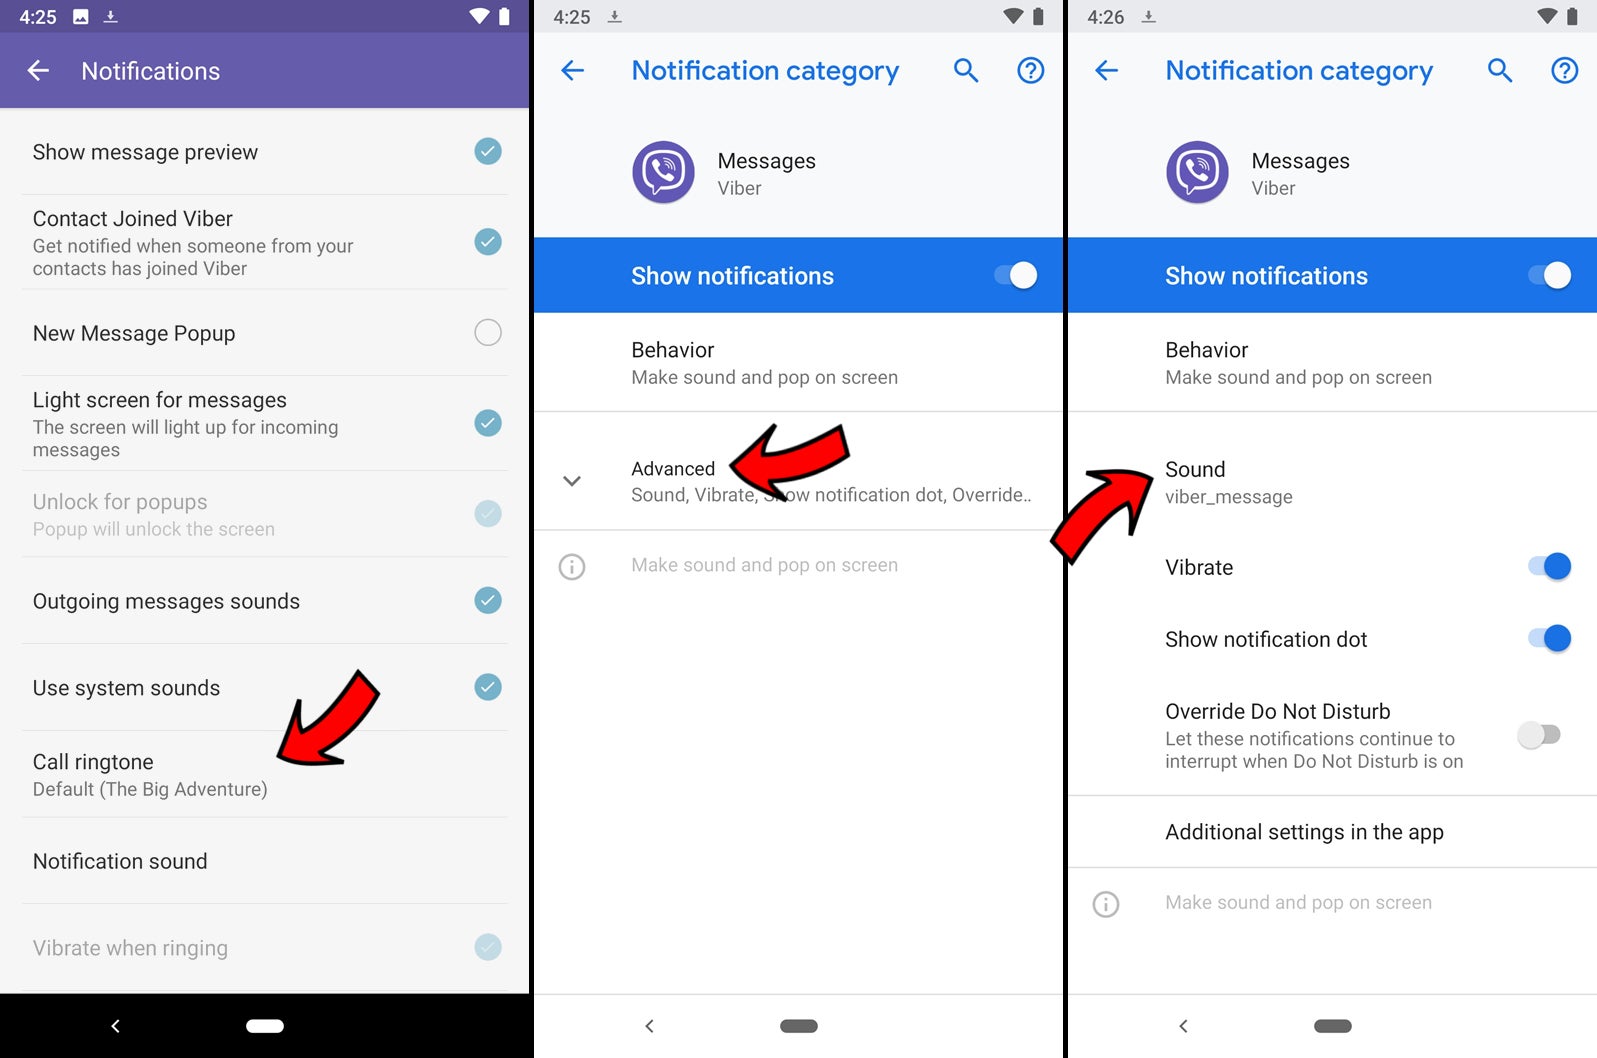 How to change the notification sounds in Facebook Messenger, Hangouts, Viber, and WhatsApp (Android tutorial)